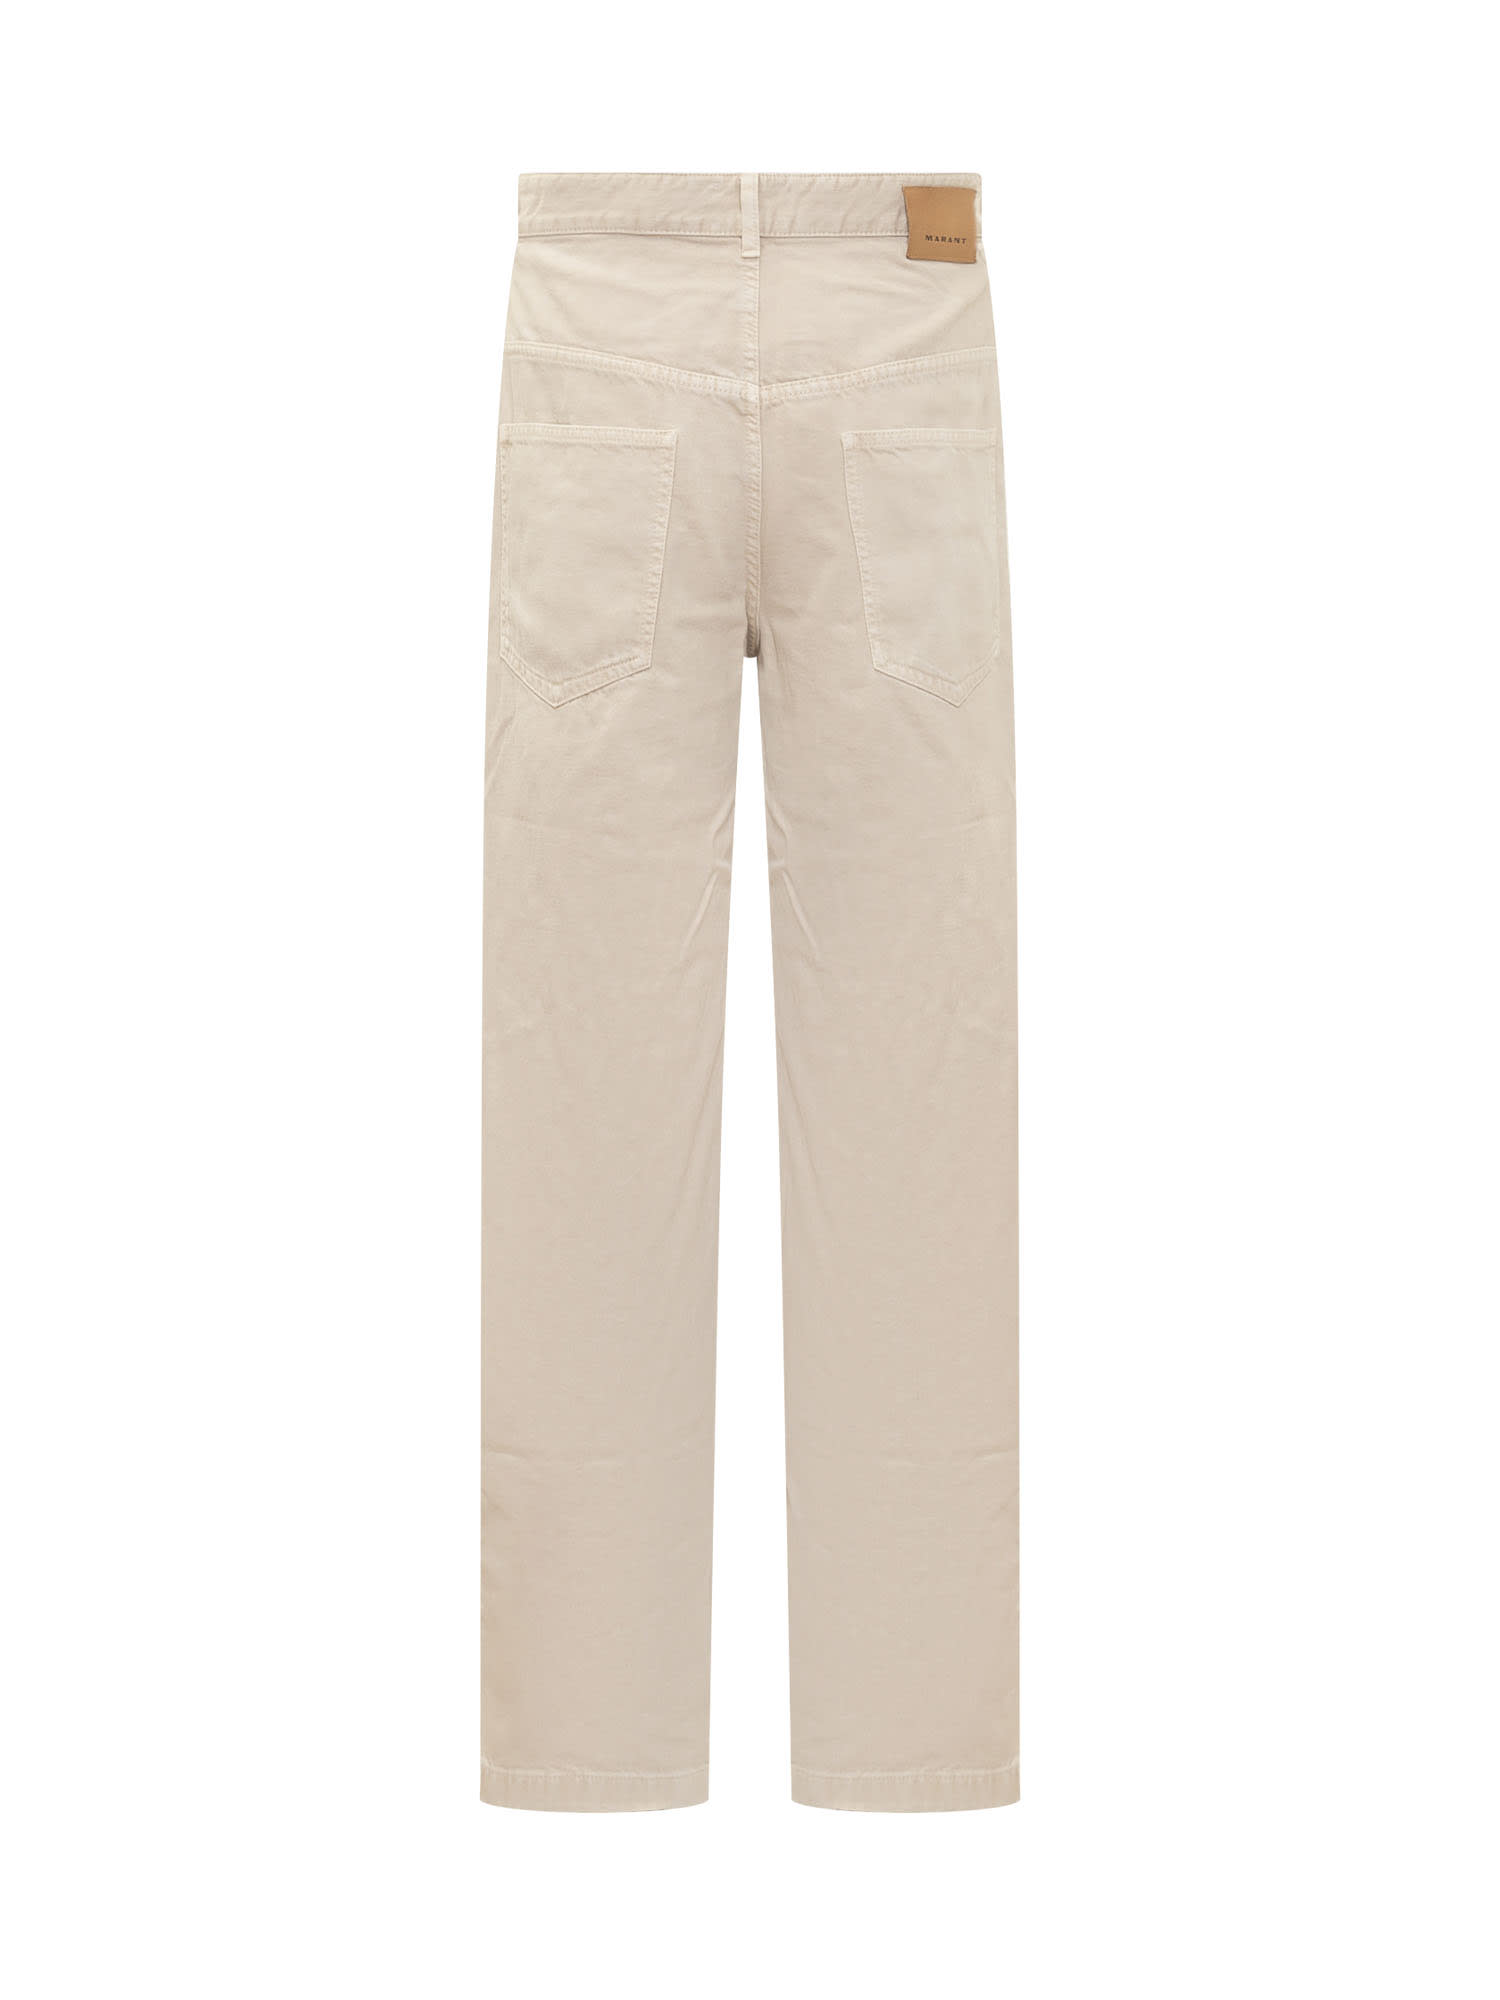 Shop Isabel Marant Janel Jeans In Neutrals